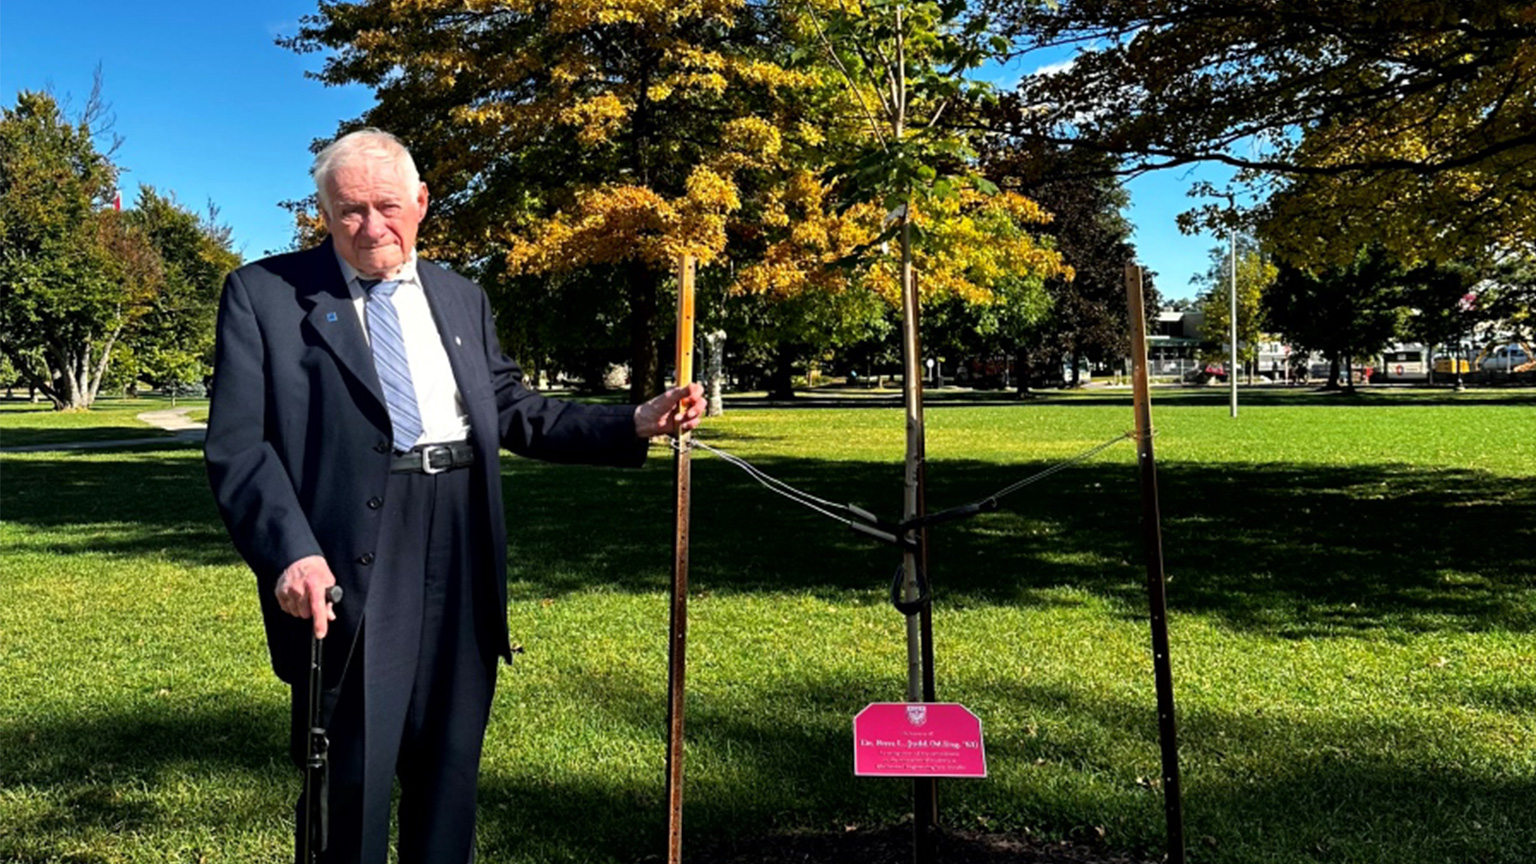 Ross Judd stands beside the tree that was planted on the JHE lawn in his honour